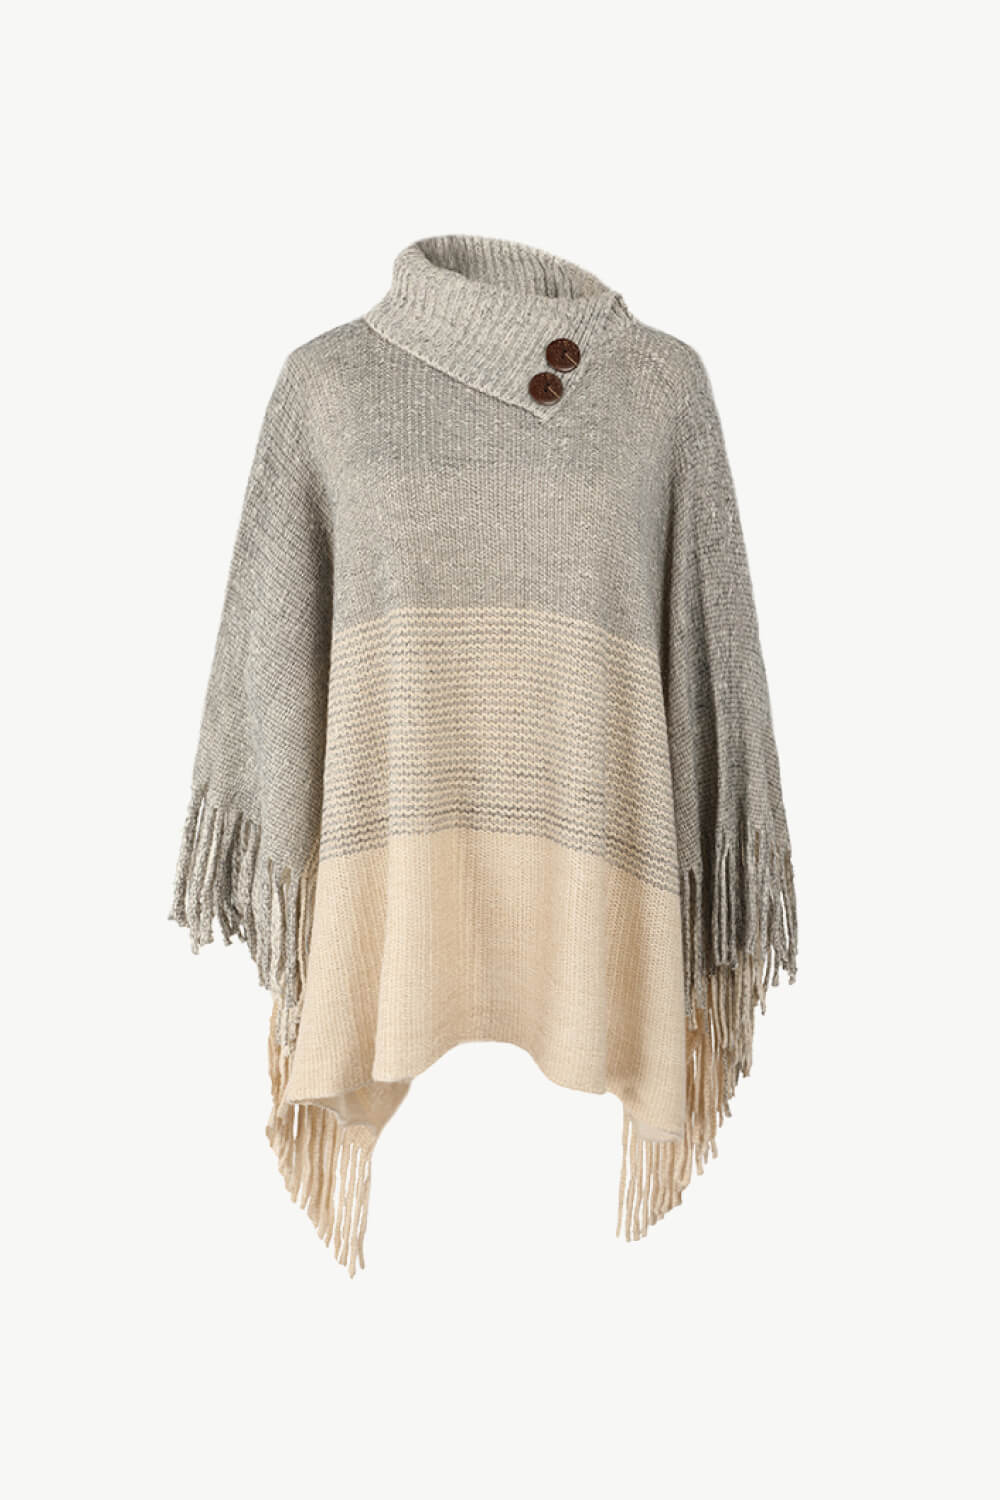 Color Block Button Detail Fringed Tunic Poncho